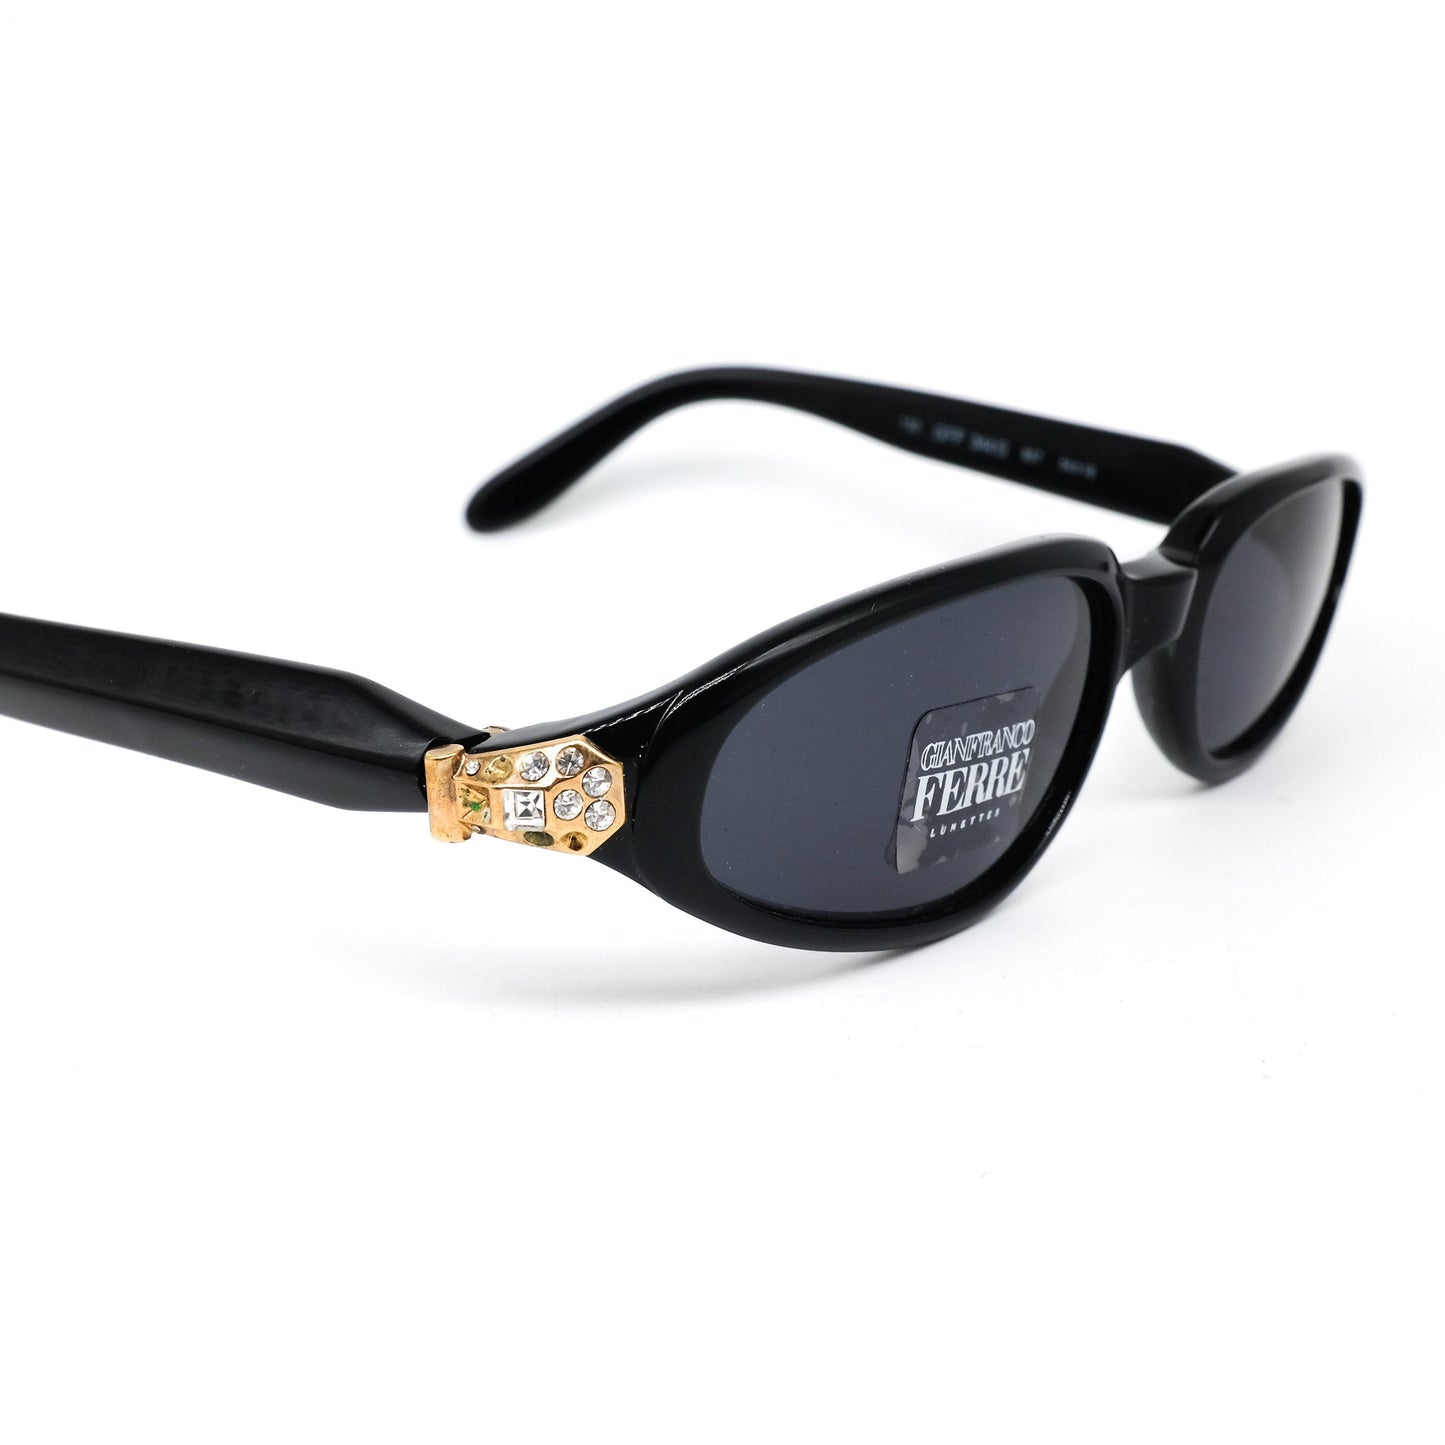 Gianfranco Ferrè GFF 344 black acetate narrow sunglasses with golden metallic details enriched with rhinestones NOS 1990s Italy.